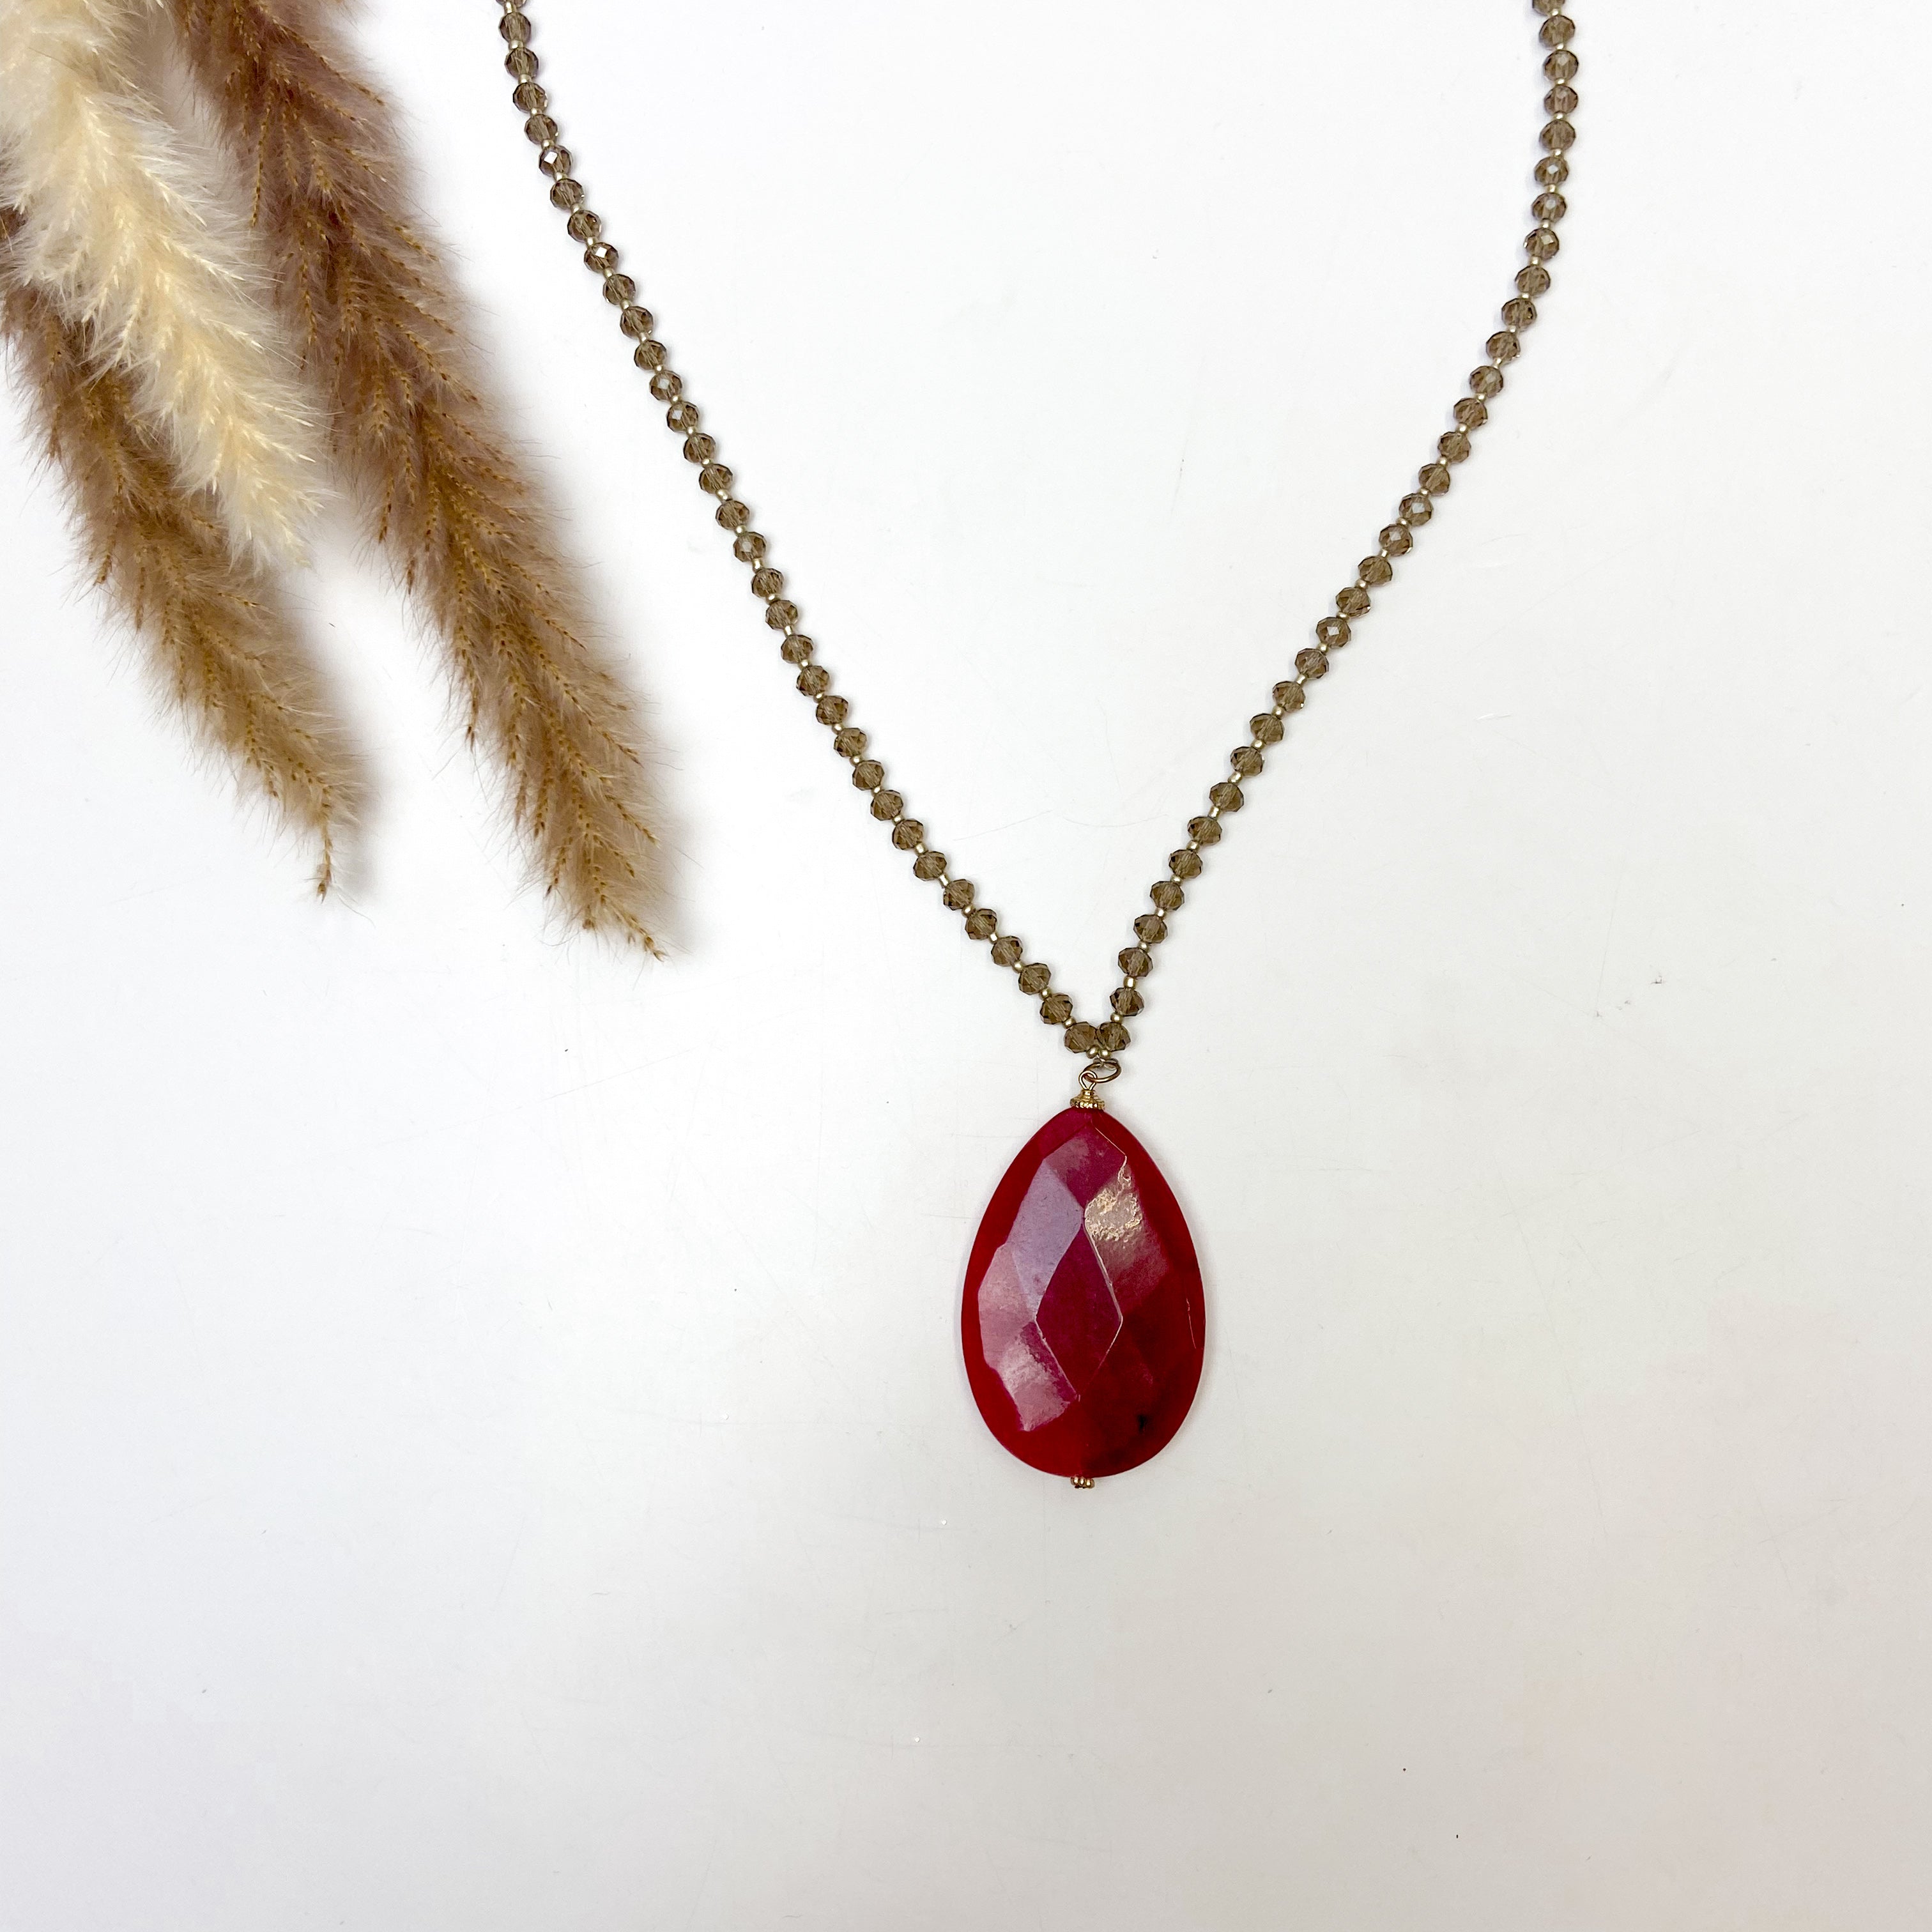 Gold Tone Beaded Necklace With Red Stone Pendant